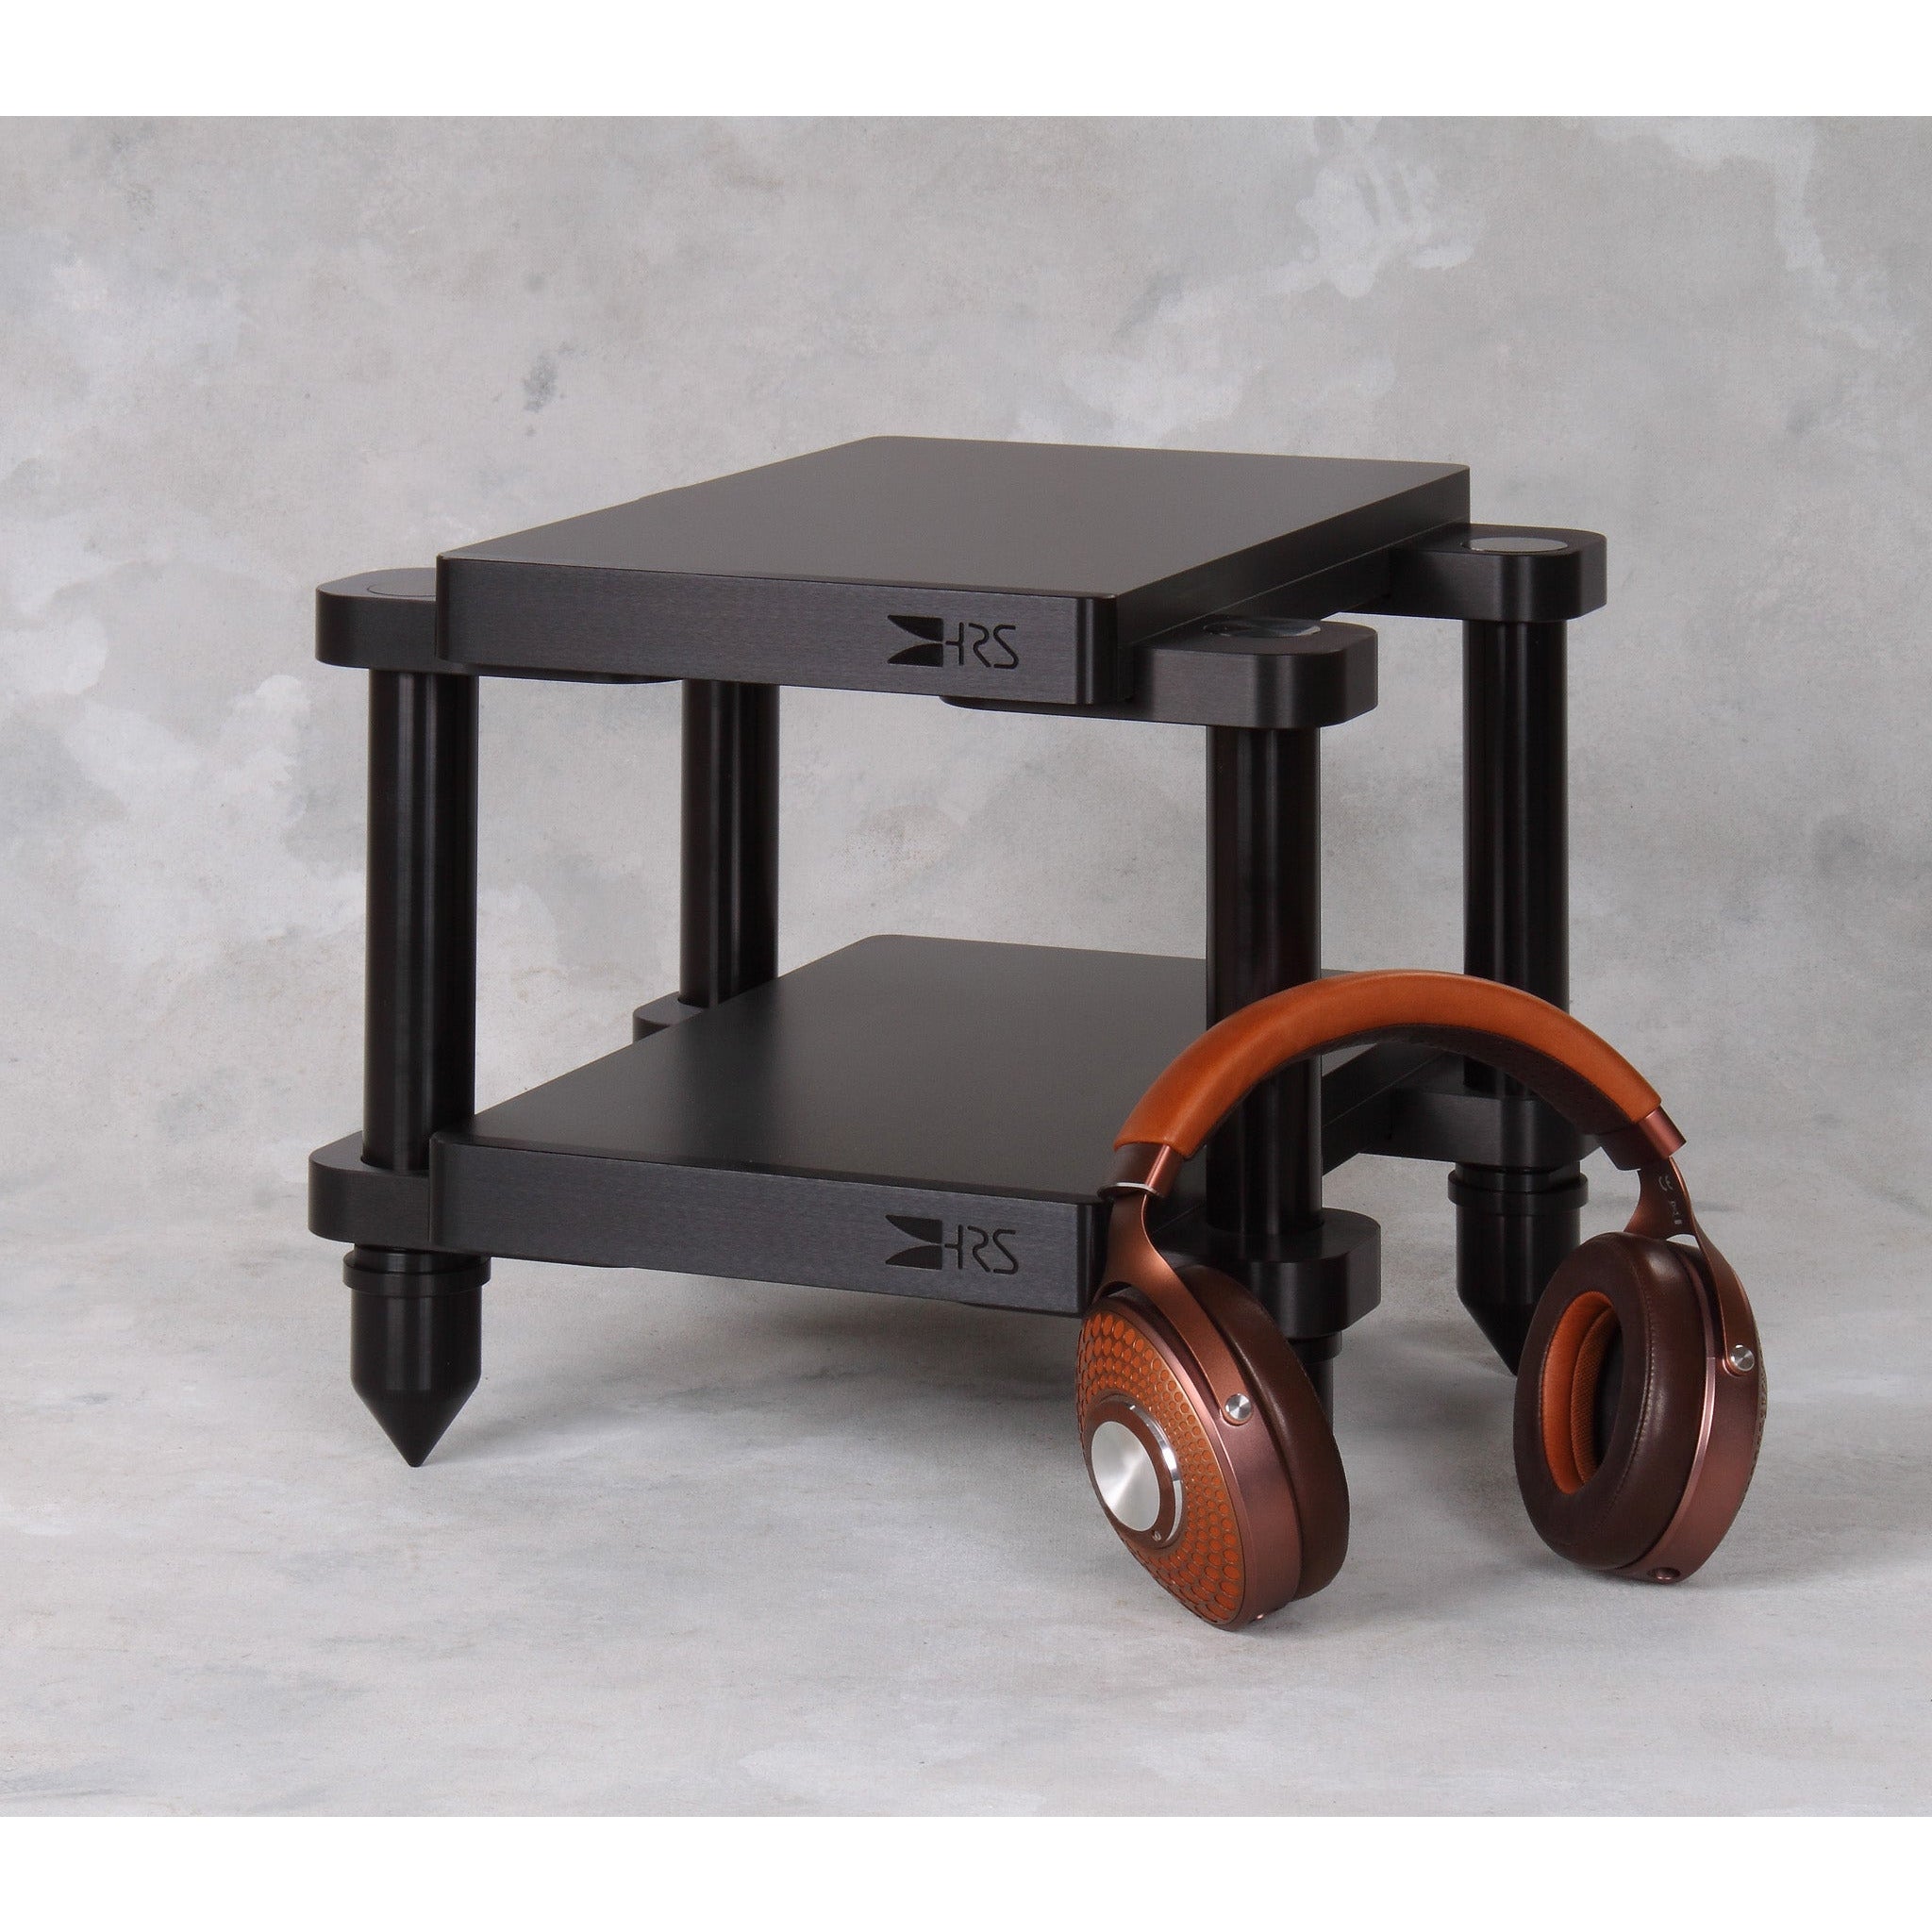 HRS EXRH Headphone Stand System - designed to suit dCS Lina and more